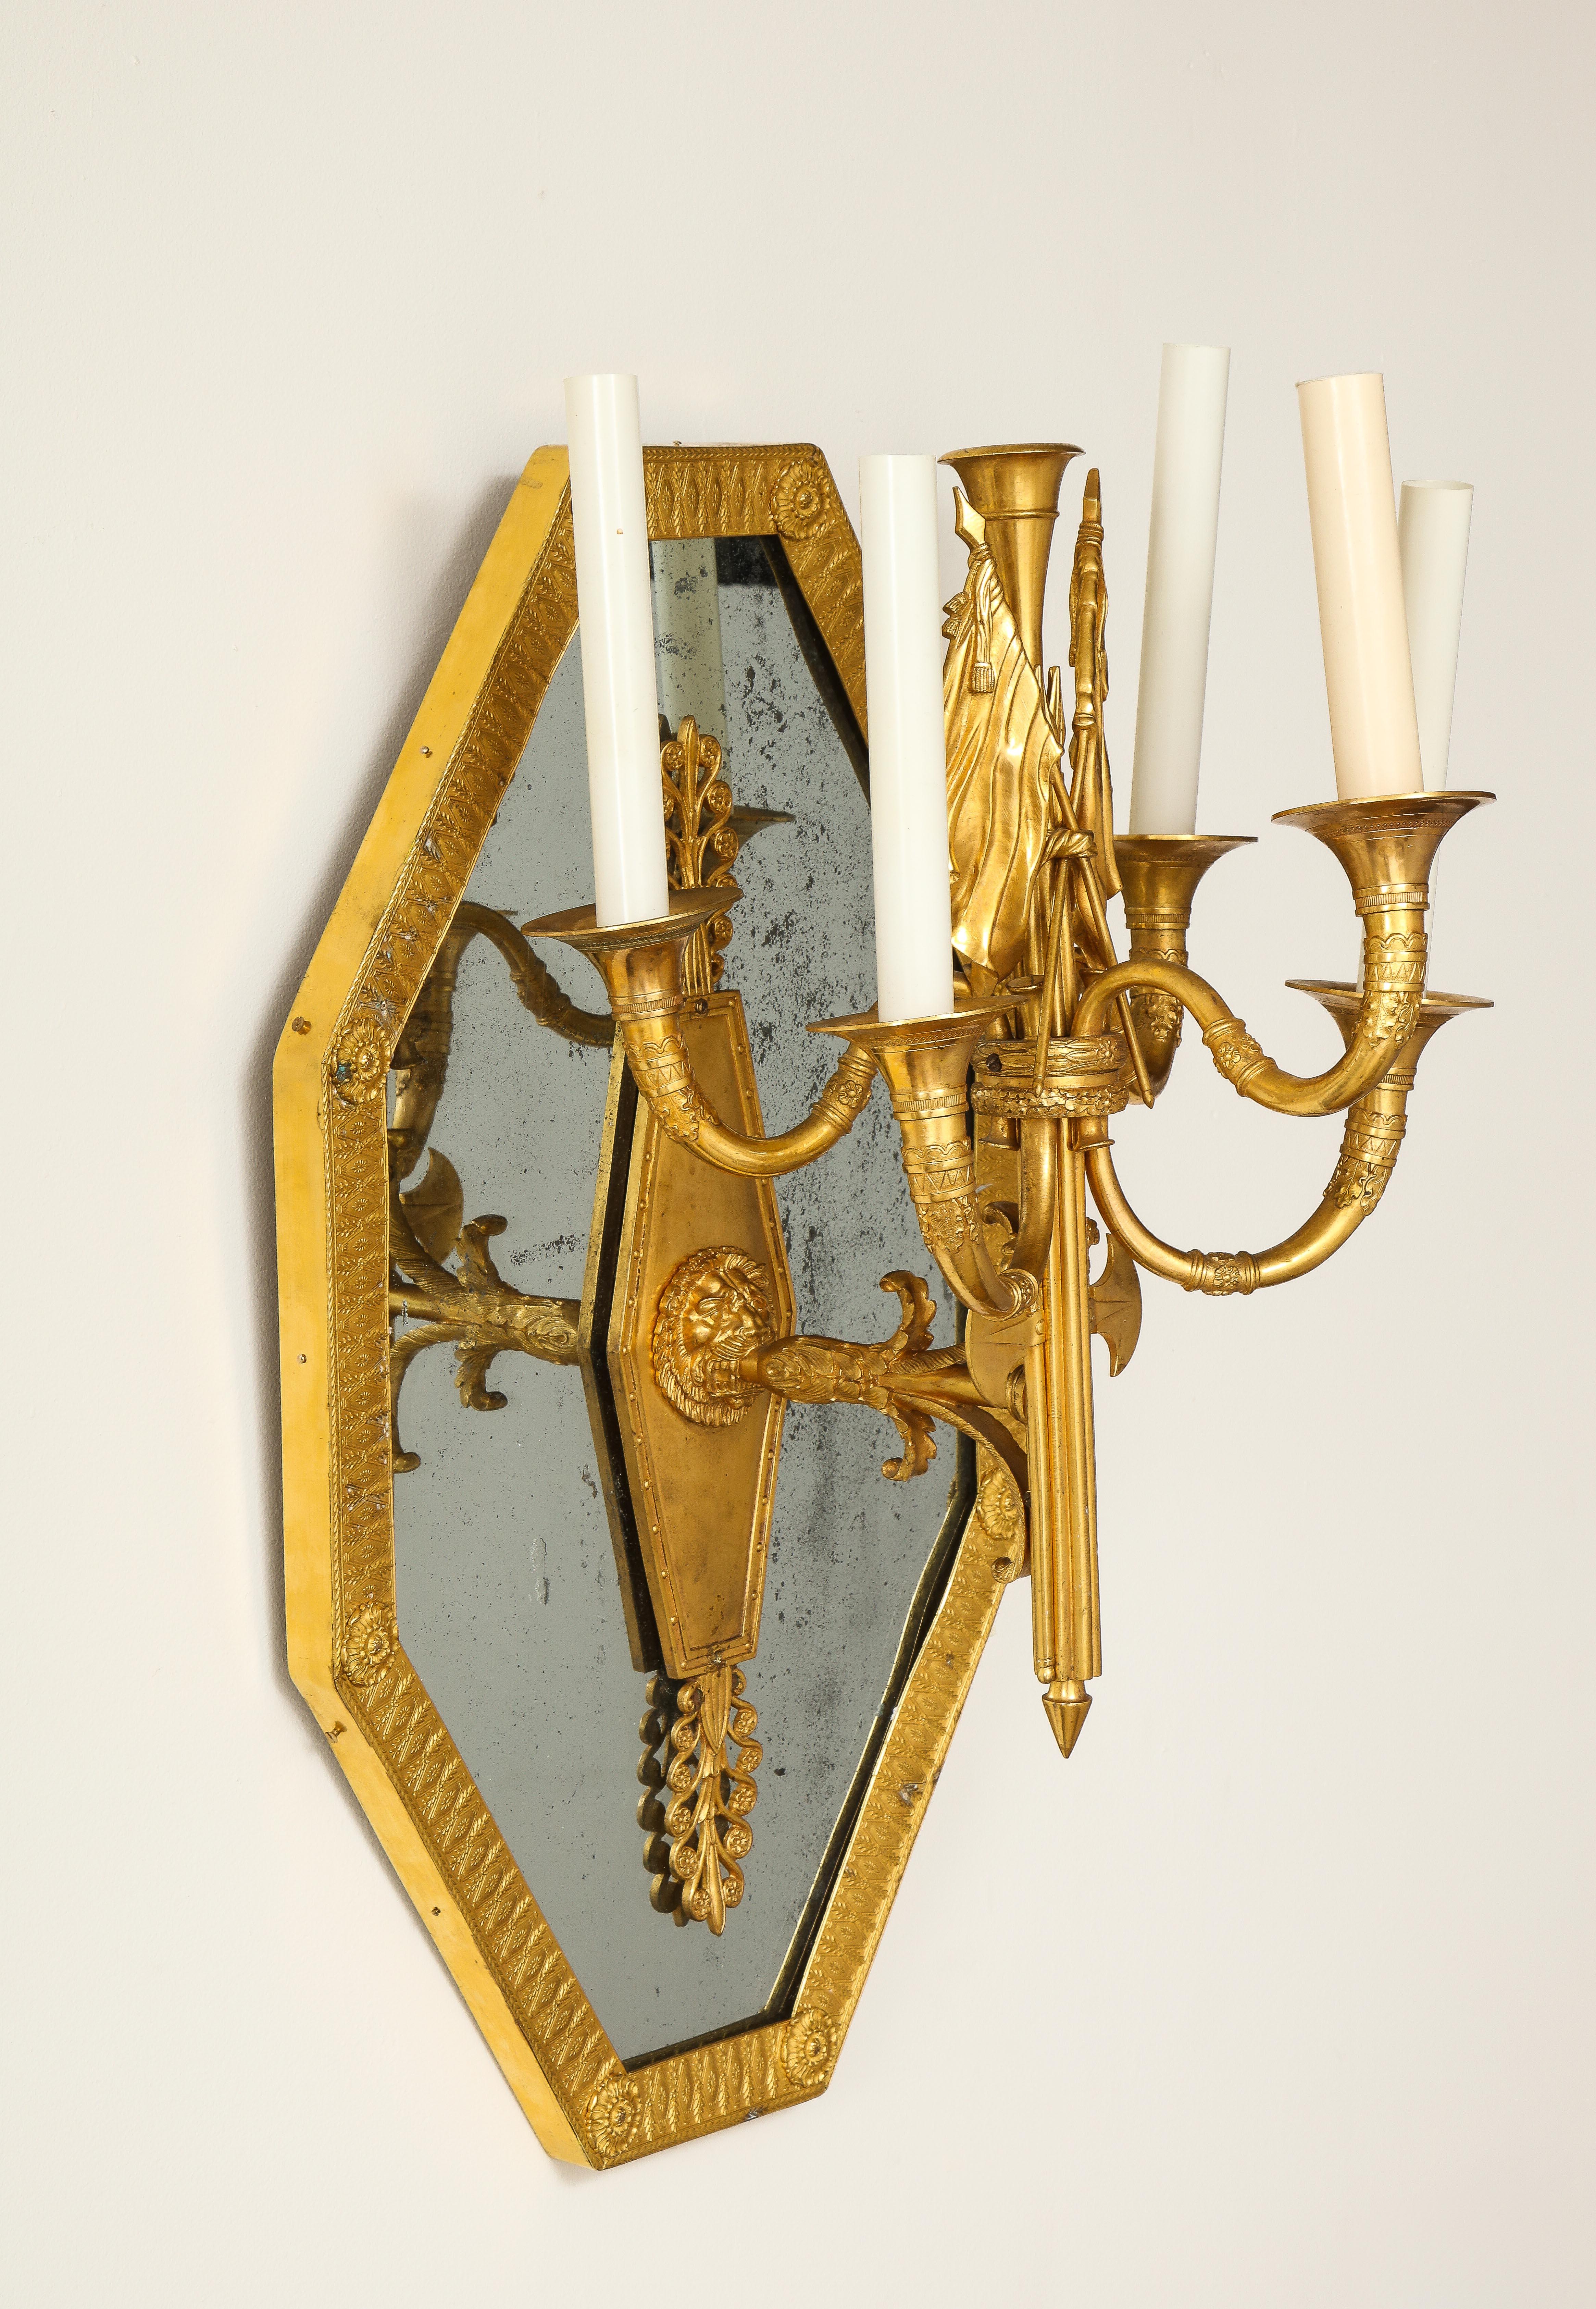 Pair of French 1st Empire Dore Bronze Mtd. 5-Arm Mirrored Sconces, Att. Thomire For Sale 1